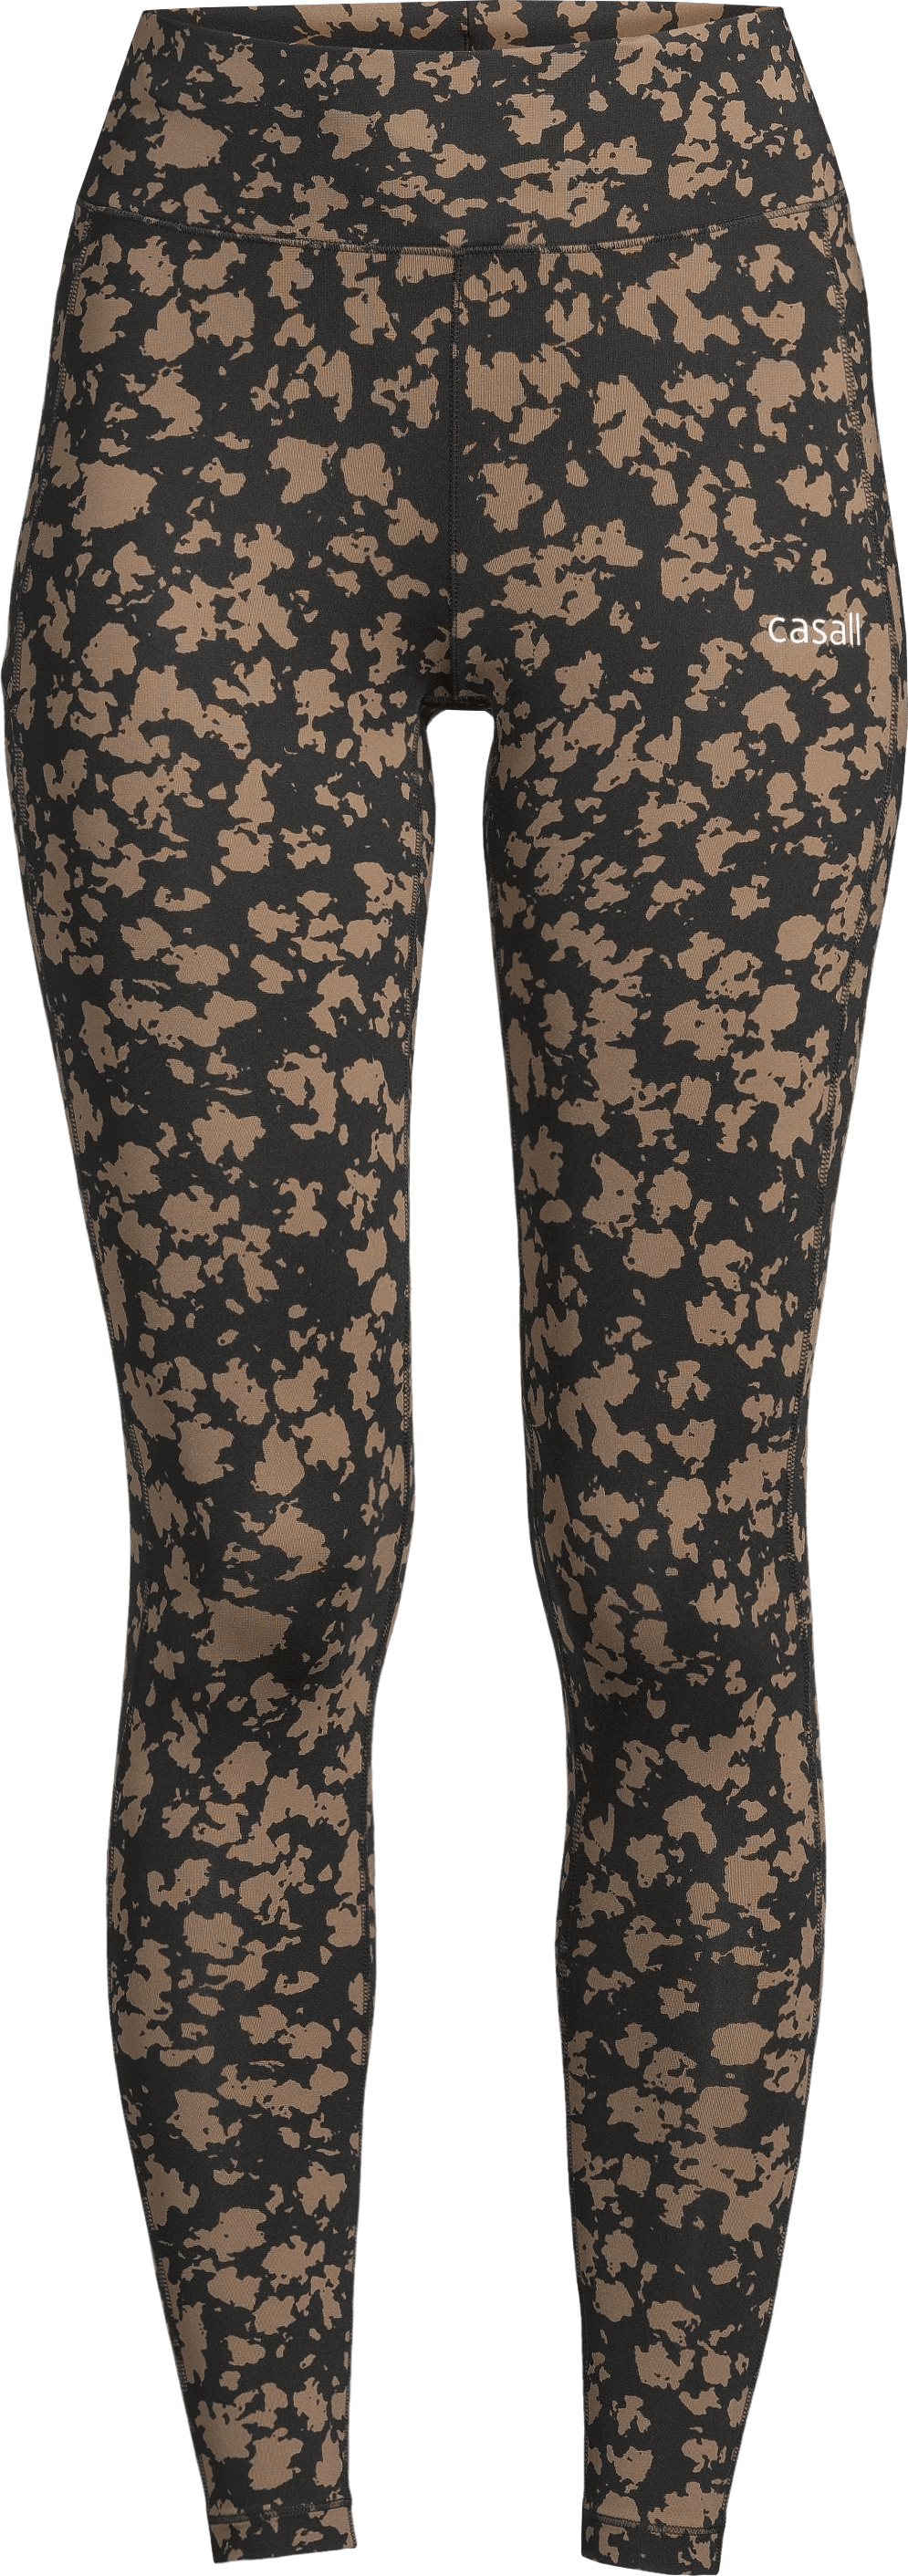 Women's Iconic Printed 7/8 Tights Cosmic Brown